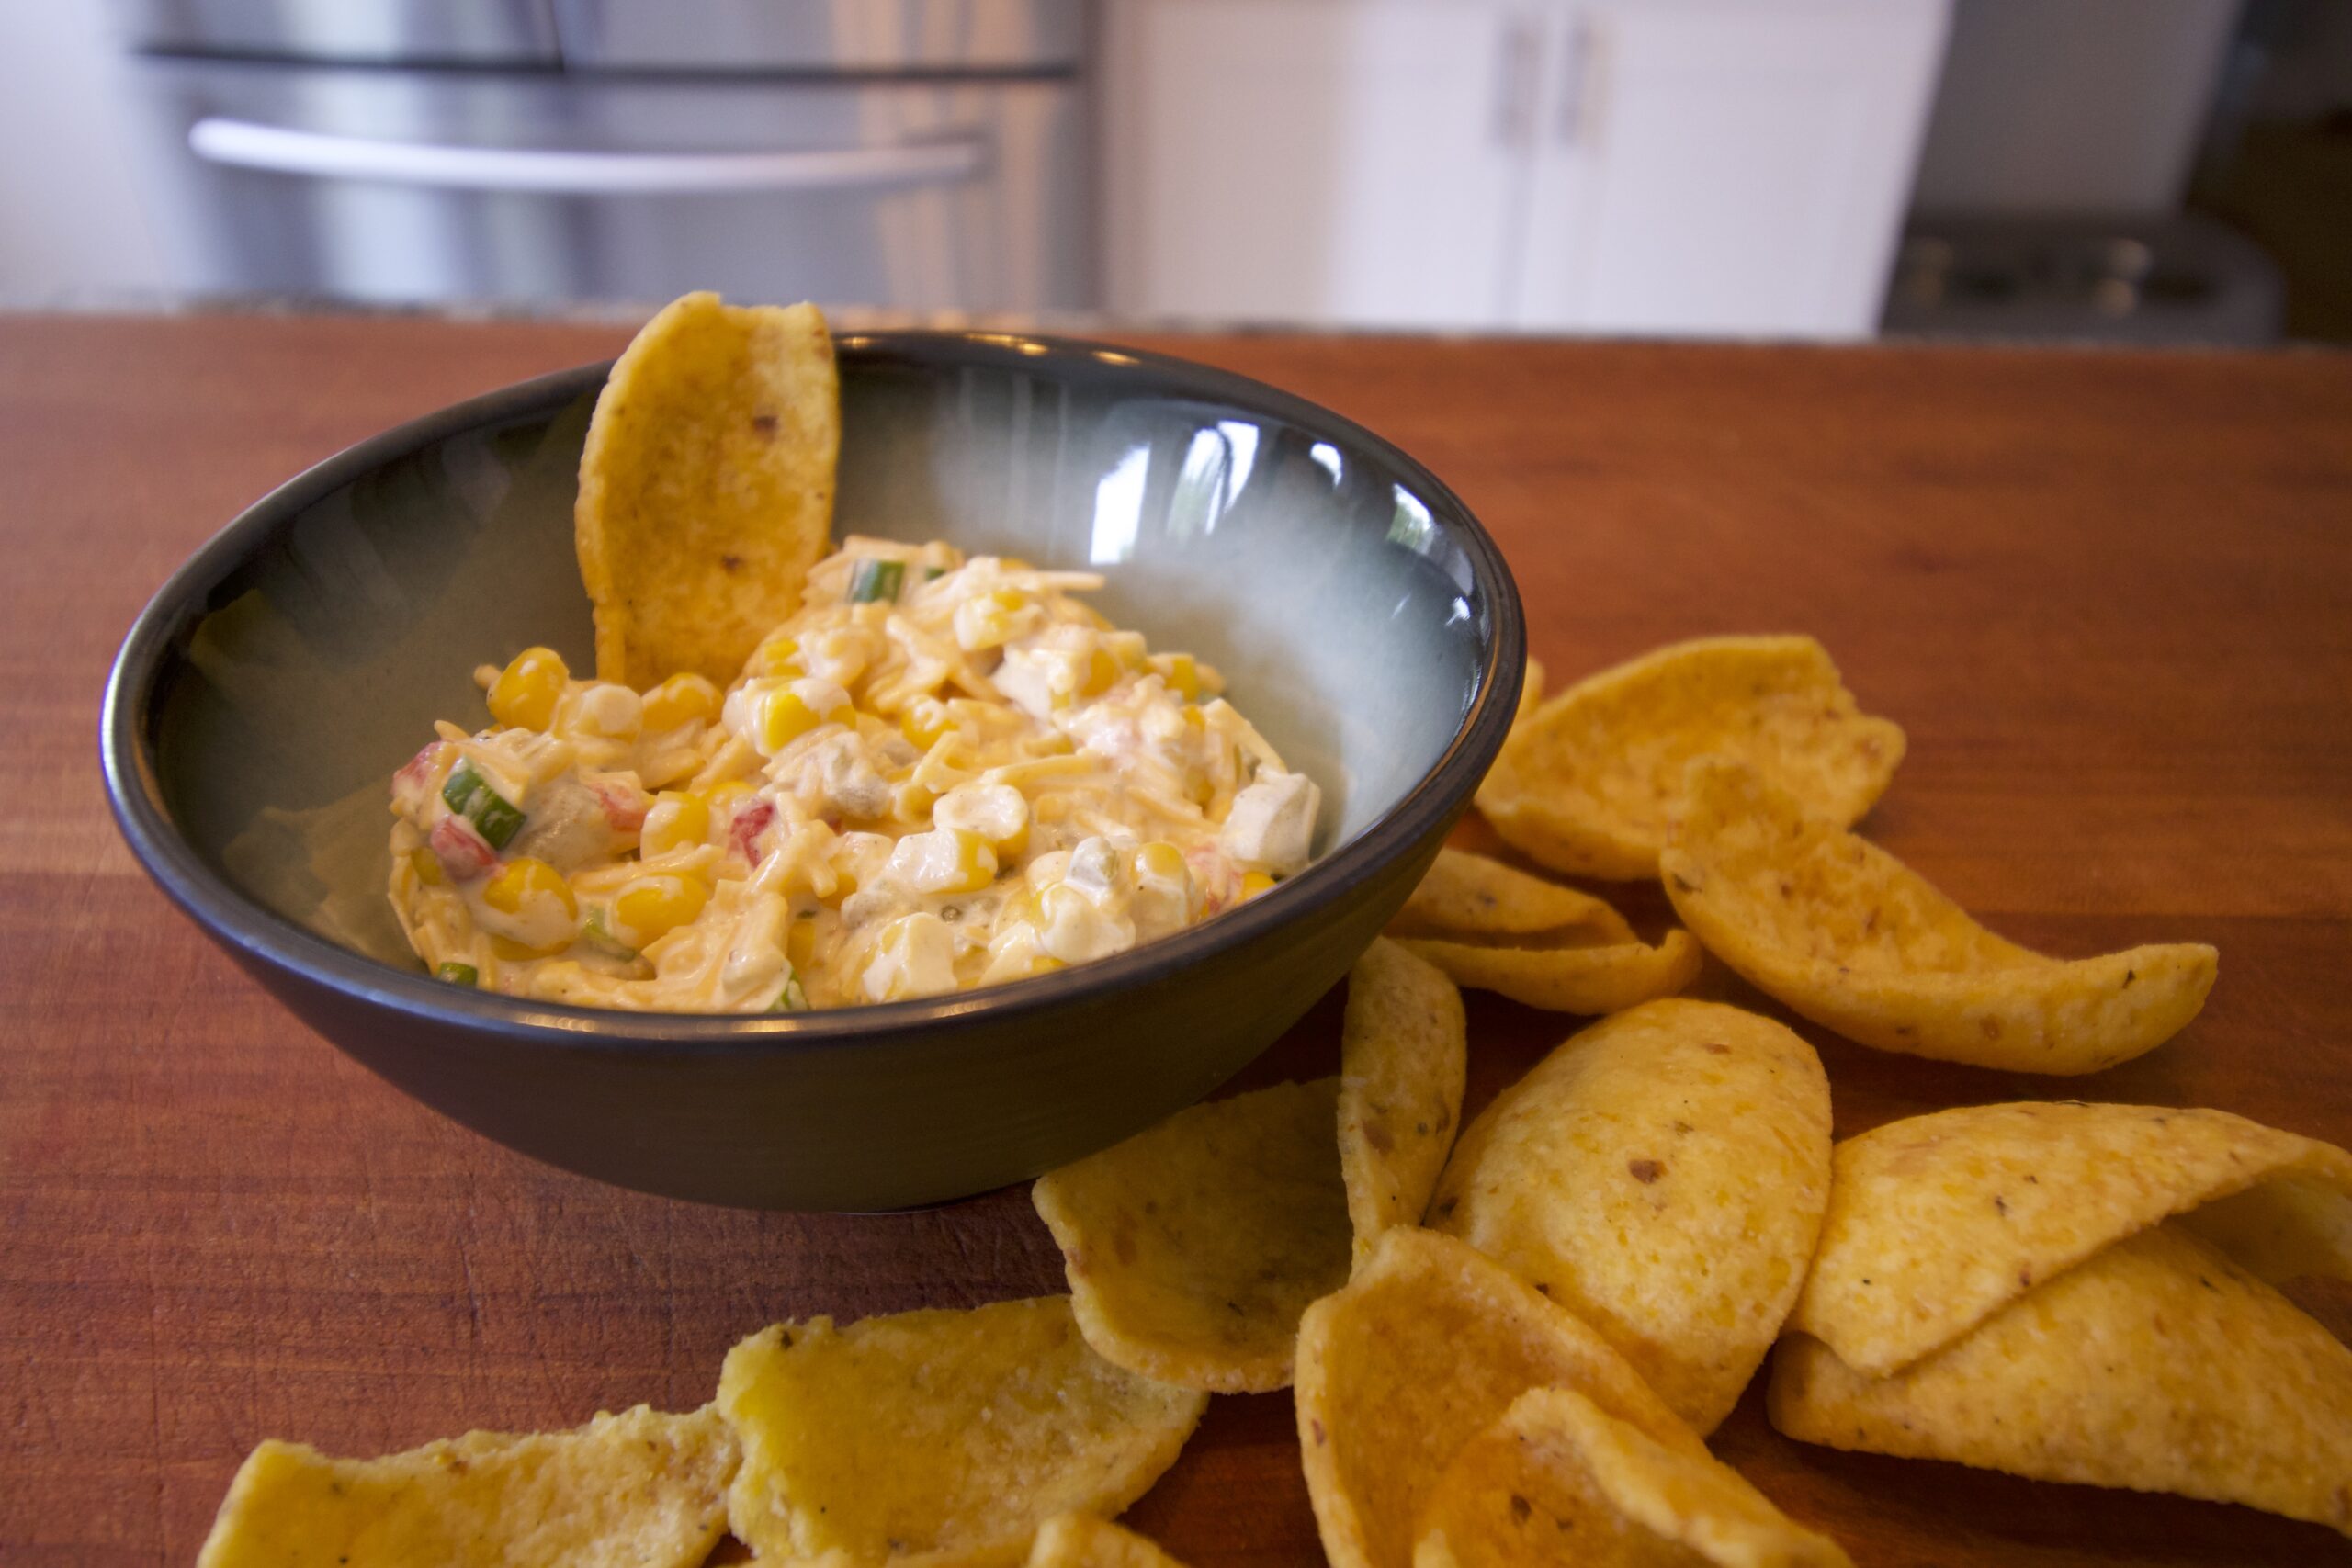 Finished corn dip in a bowl.